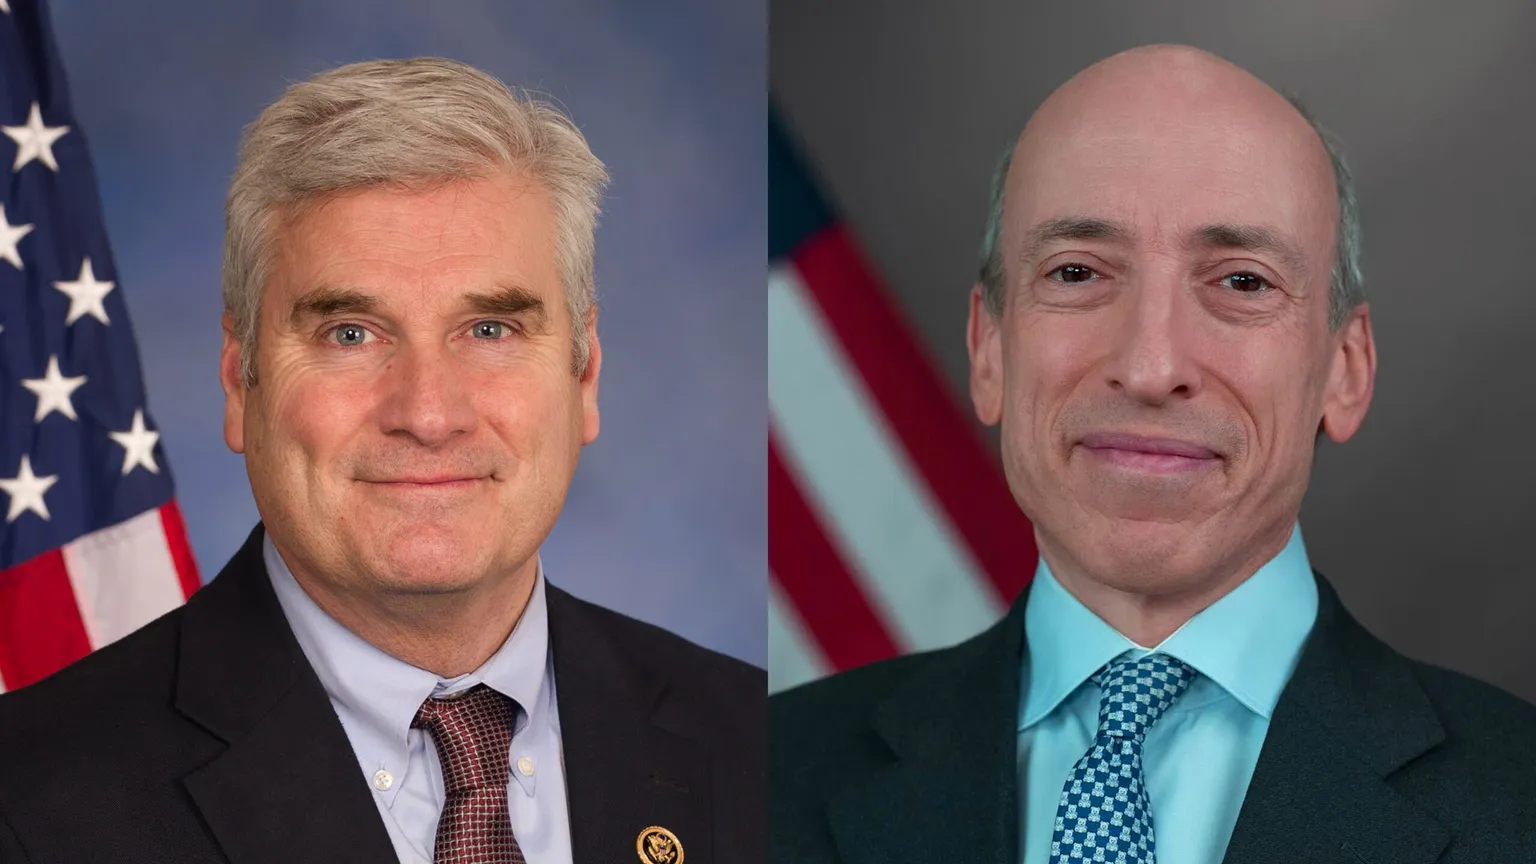 Rep. Tom Emmer, member of the House Financial Services Committee, and SEC Chair Gary Gensler.